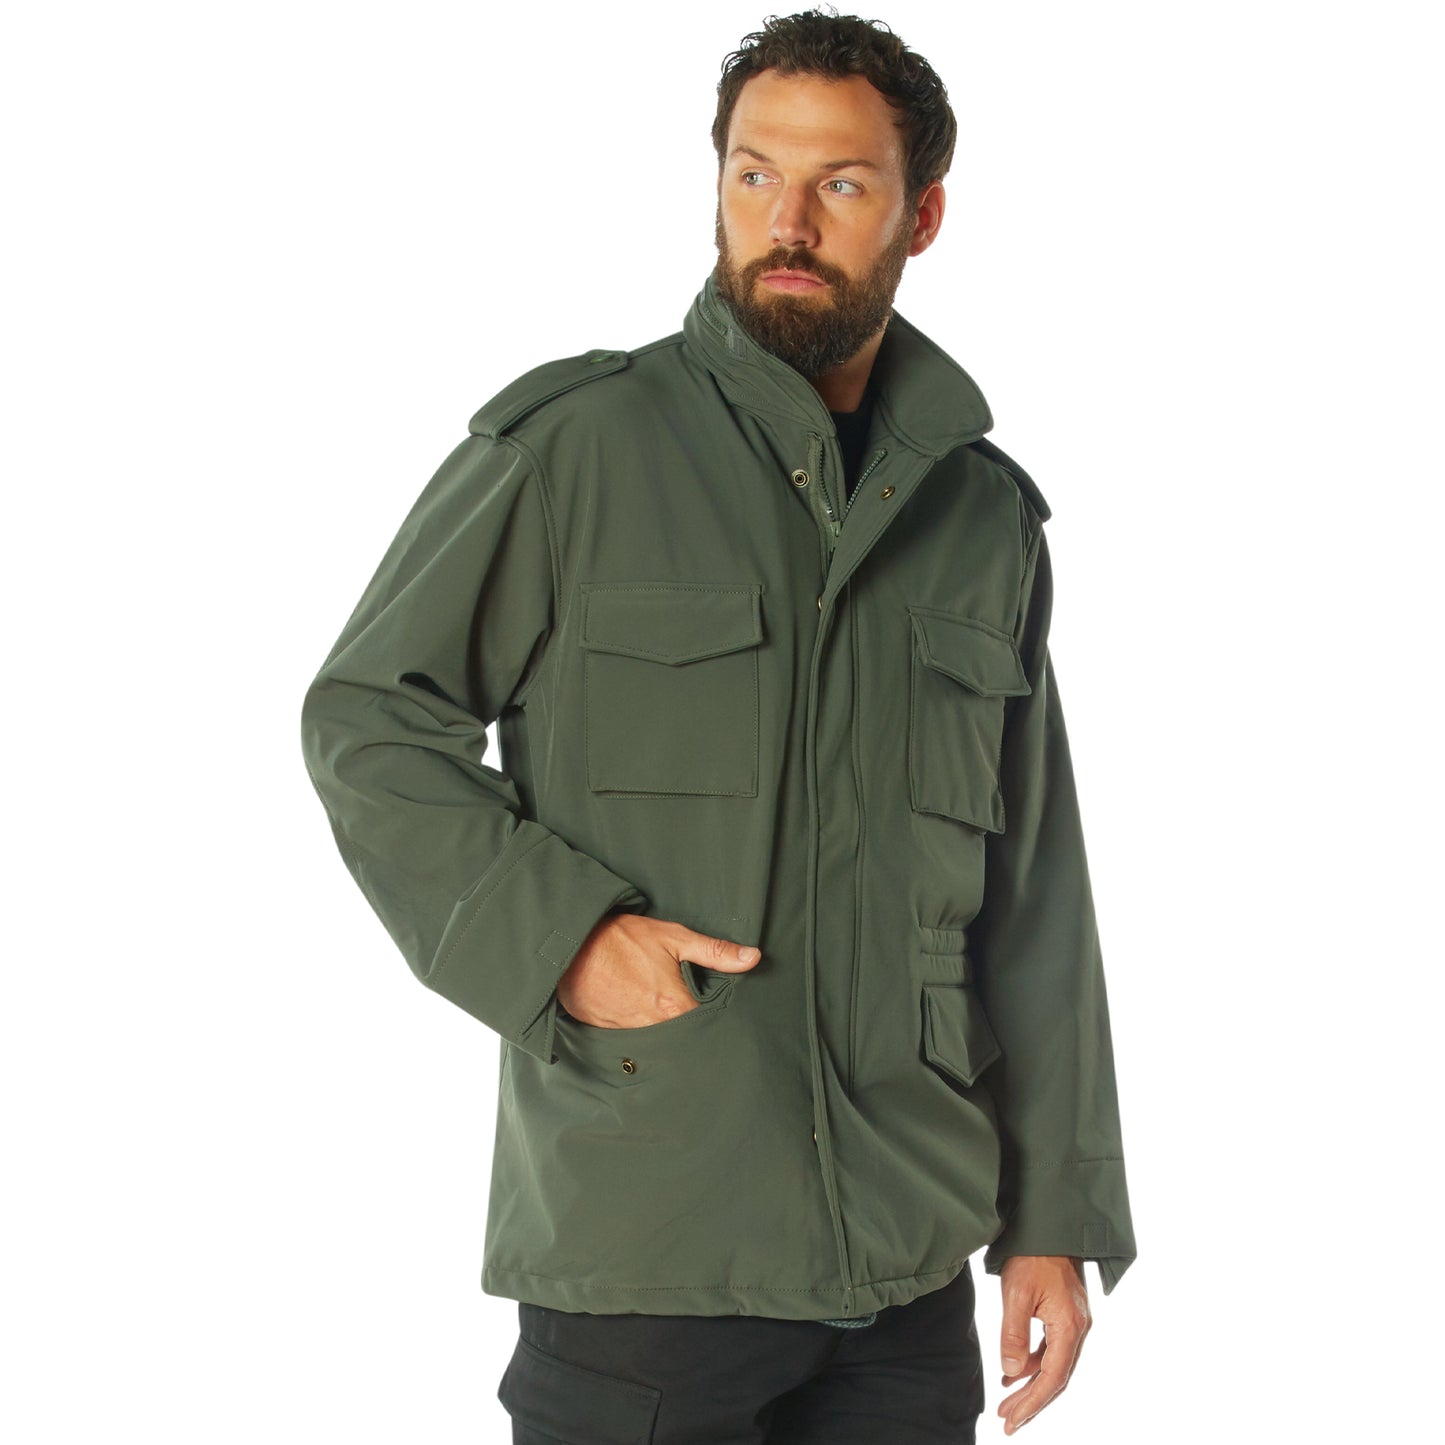 Rothco Soft Shell Tactical M-65 Field Jacket